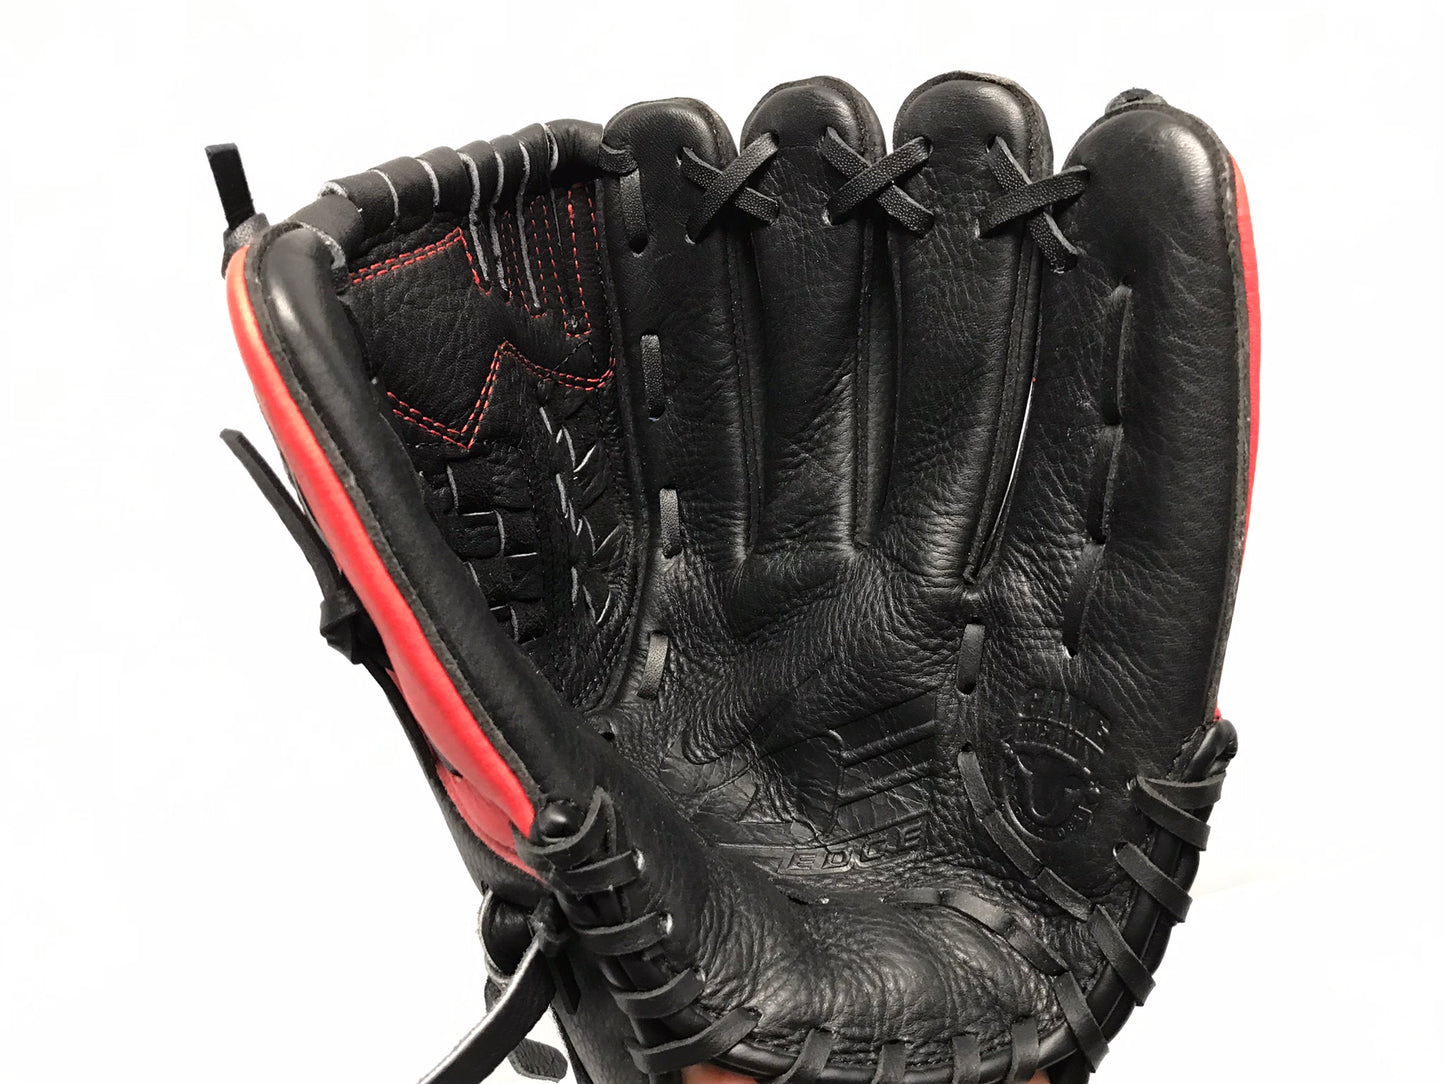 Baseball Glove Adult Size 12 inch Nike Black Red Leather Fits on Left Hand New Demo Model